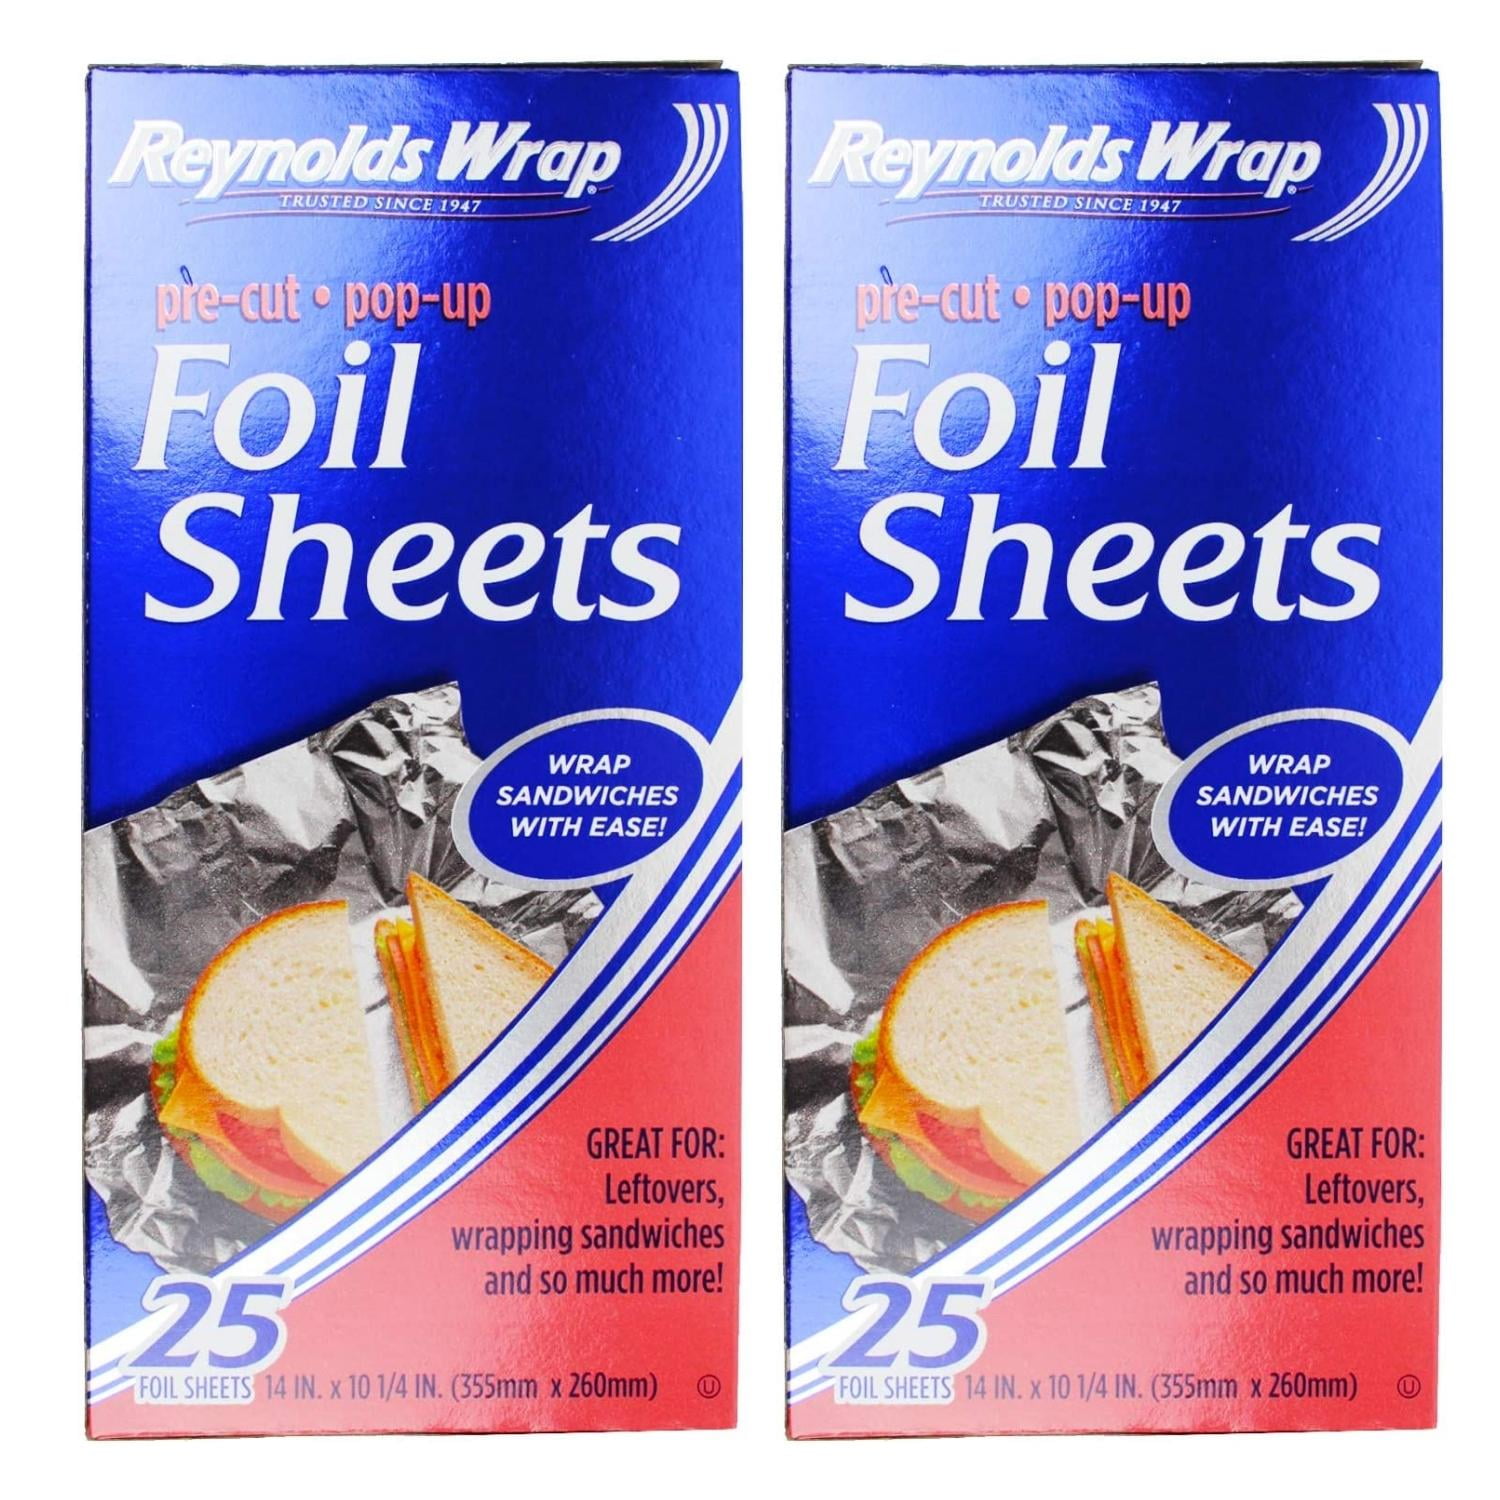 Reynolds Wrap 711 Pop-Up Interfolded Aluminum Foil Sheets, 9 x 10 3/4,  Silver, 6 Packs of 500 (Case of 3000 Sheets)